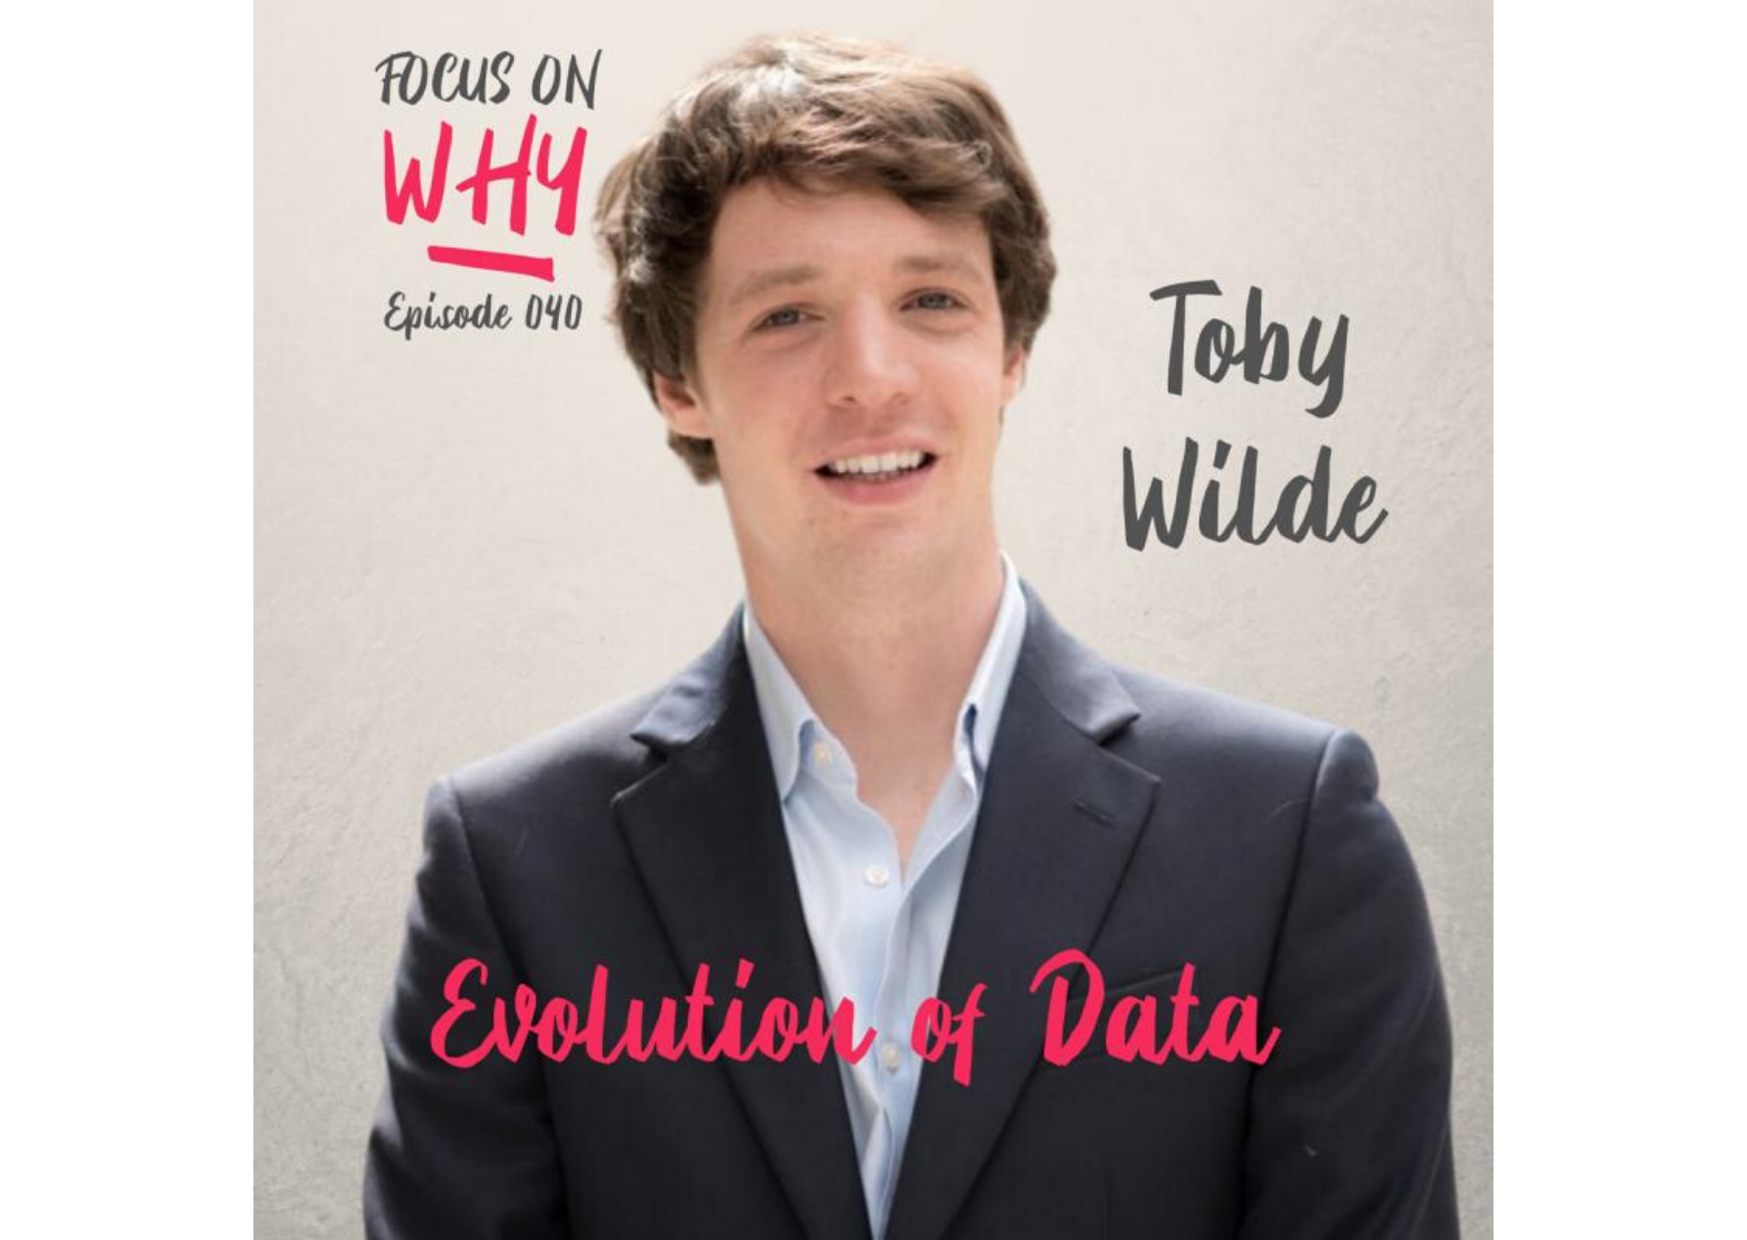 Focus On Why Podcast – Evolution of Data with Toby Wilde